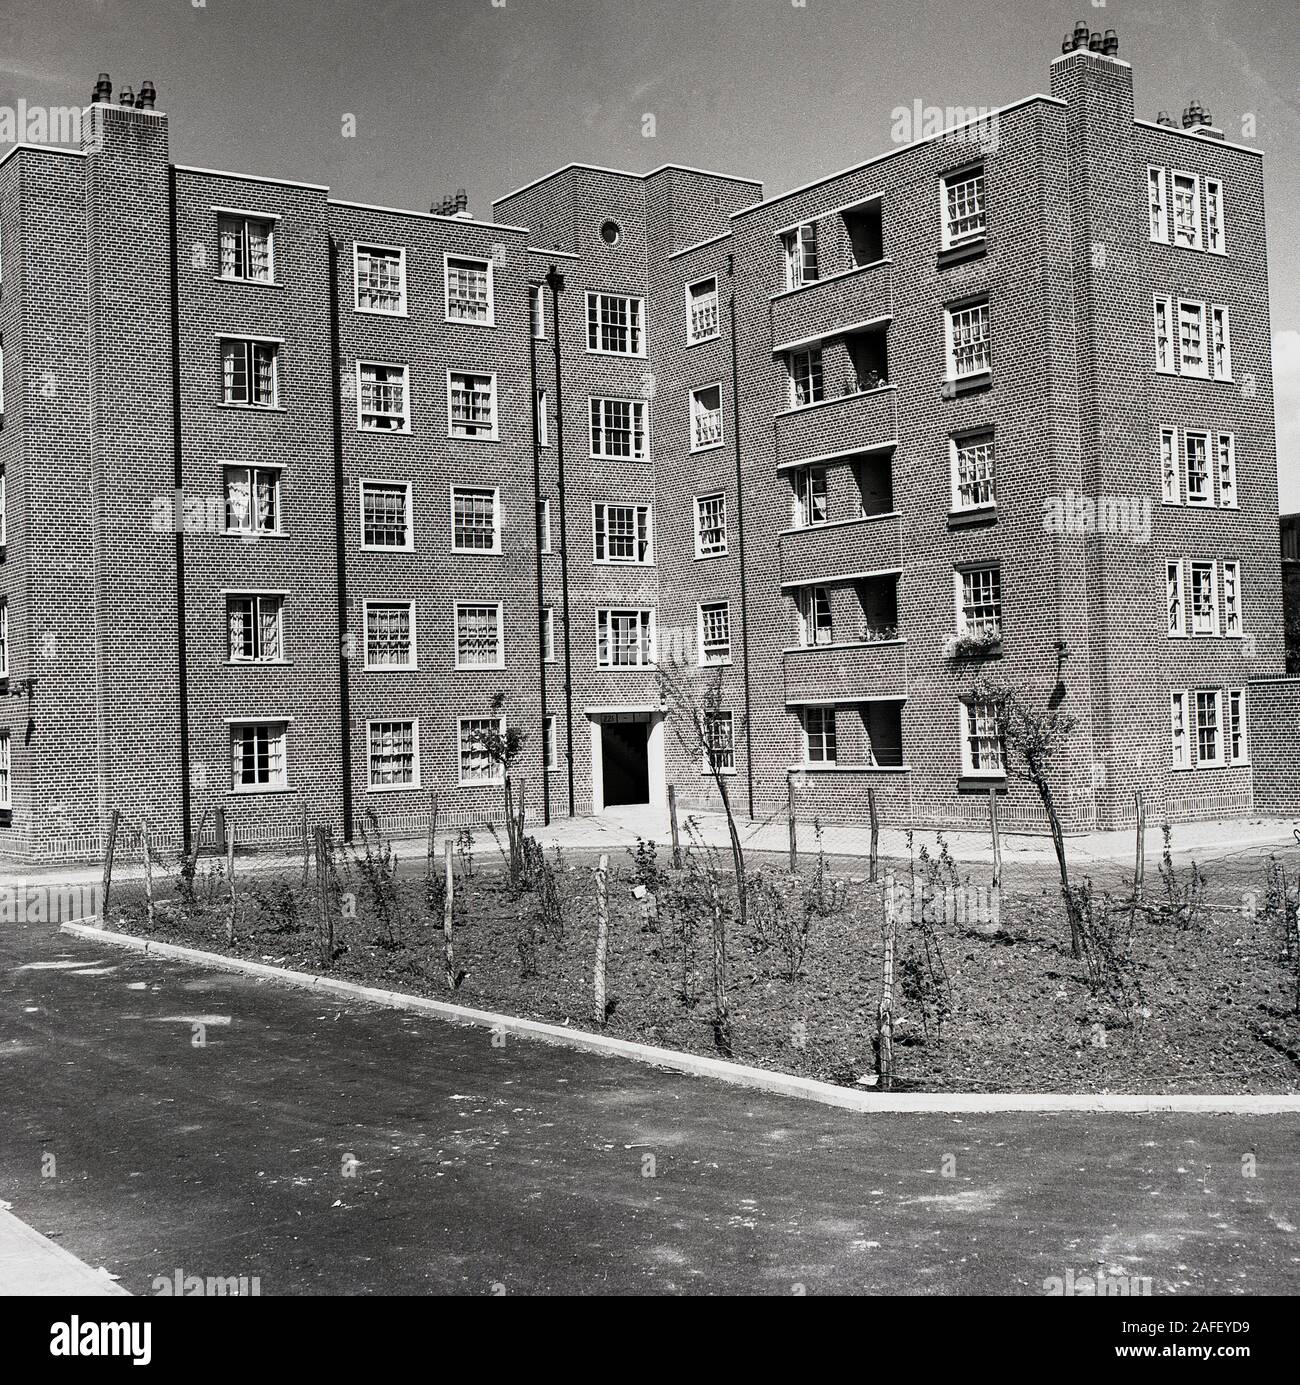 1950s, historical, post-war and newly constructed, brick-built blocks of flats or maisonettes, London, England, UK. Built by local authorities to house local workers, these relatively low-level units were built using traditional methods of construction, and were typical of the architectural style of the immediate post-war years, before the high-rise pre-cast concrete built tower blocks of the 'modern' movement of the following decade. Stock Photo